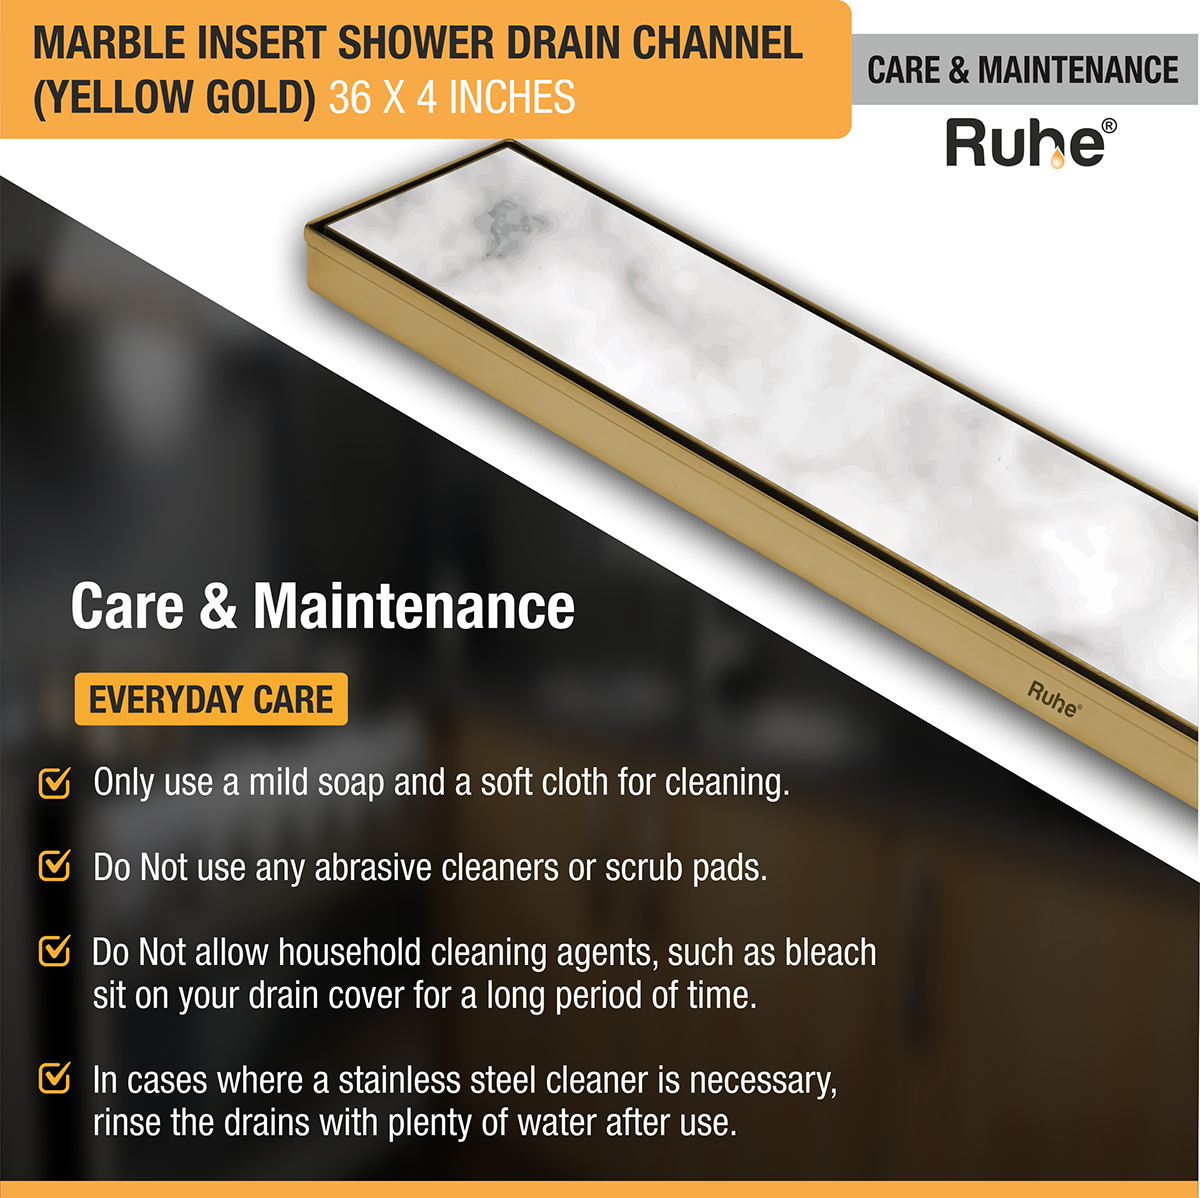 Marble Insert Shower Drain Channel (36 x 4 Inches) YELLOW GOLD PVD Coated care and maintenance